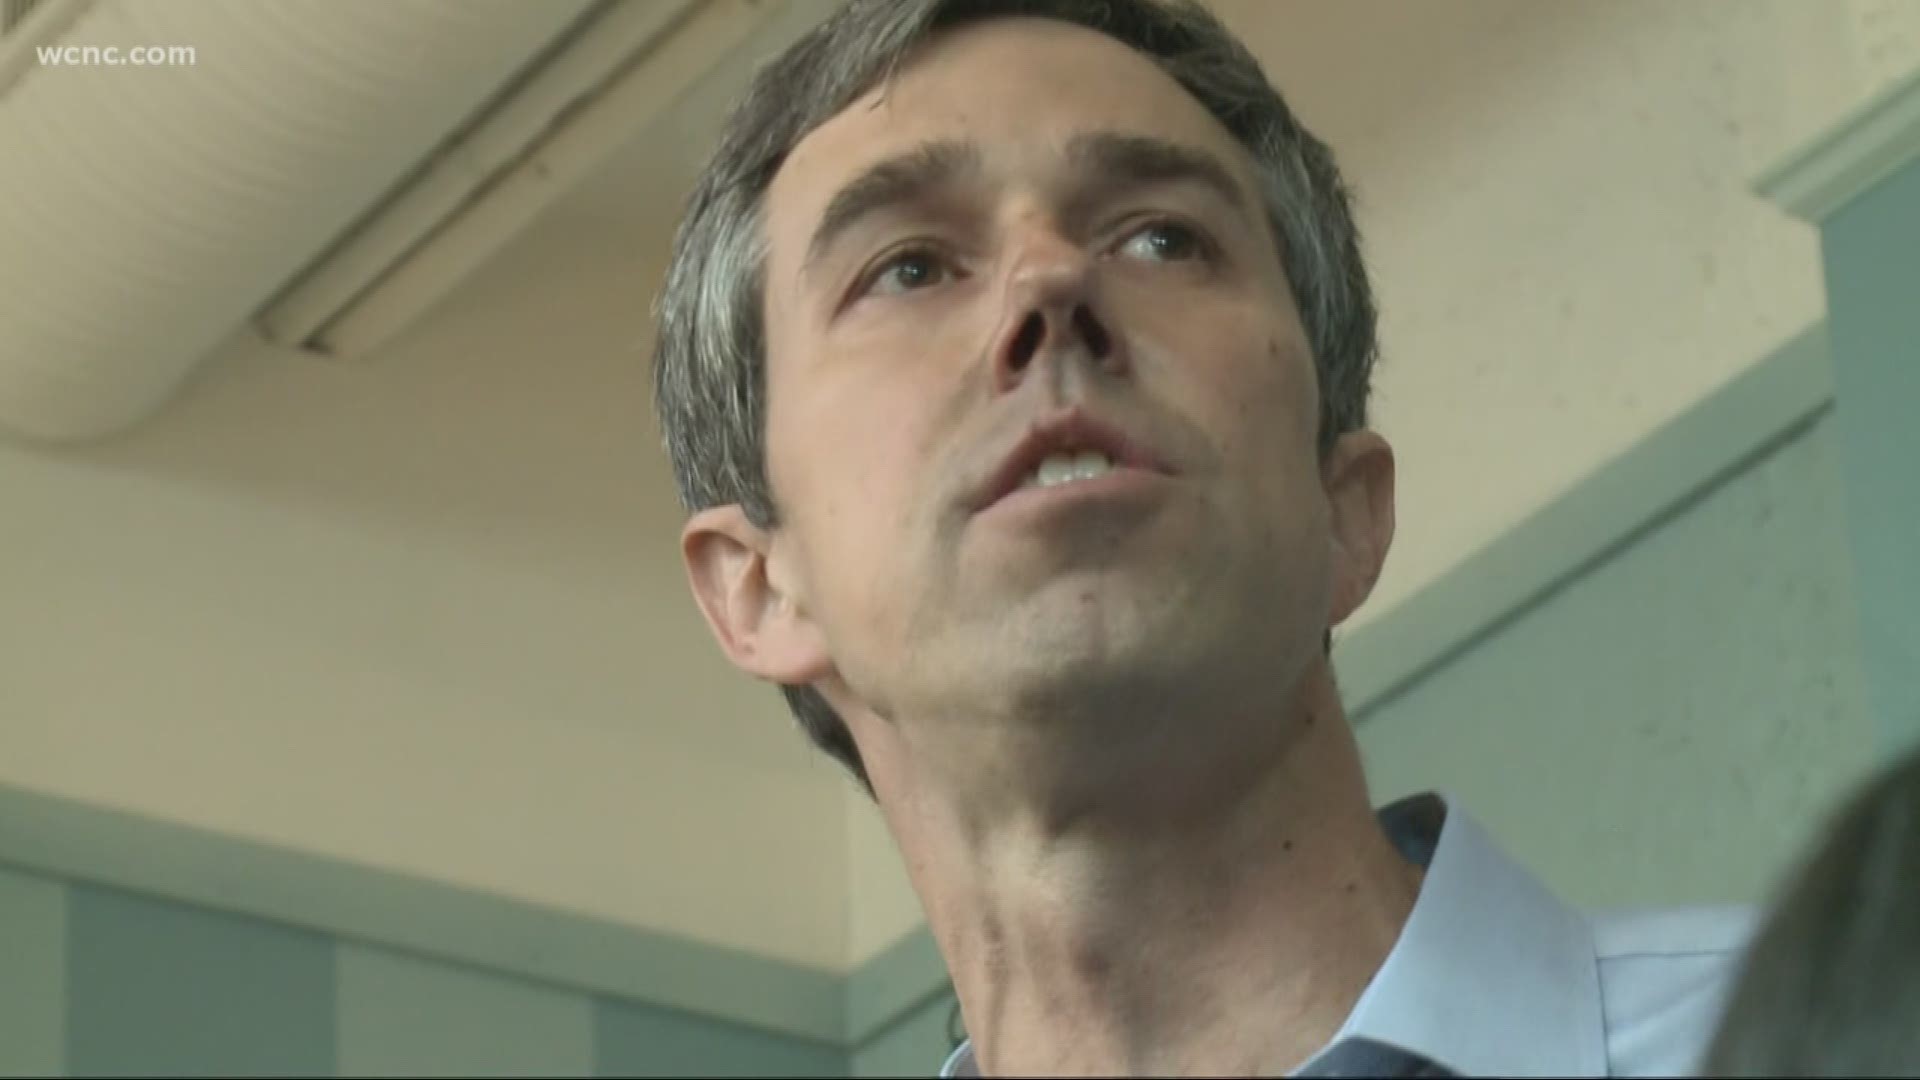 The Texas native, Beto O'Rourke met with Rock Hill leaders in hopes he can pick up ground in a state that plays a key part in the election.